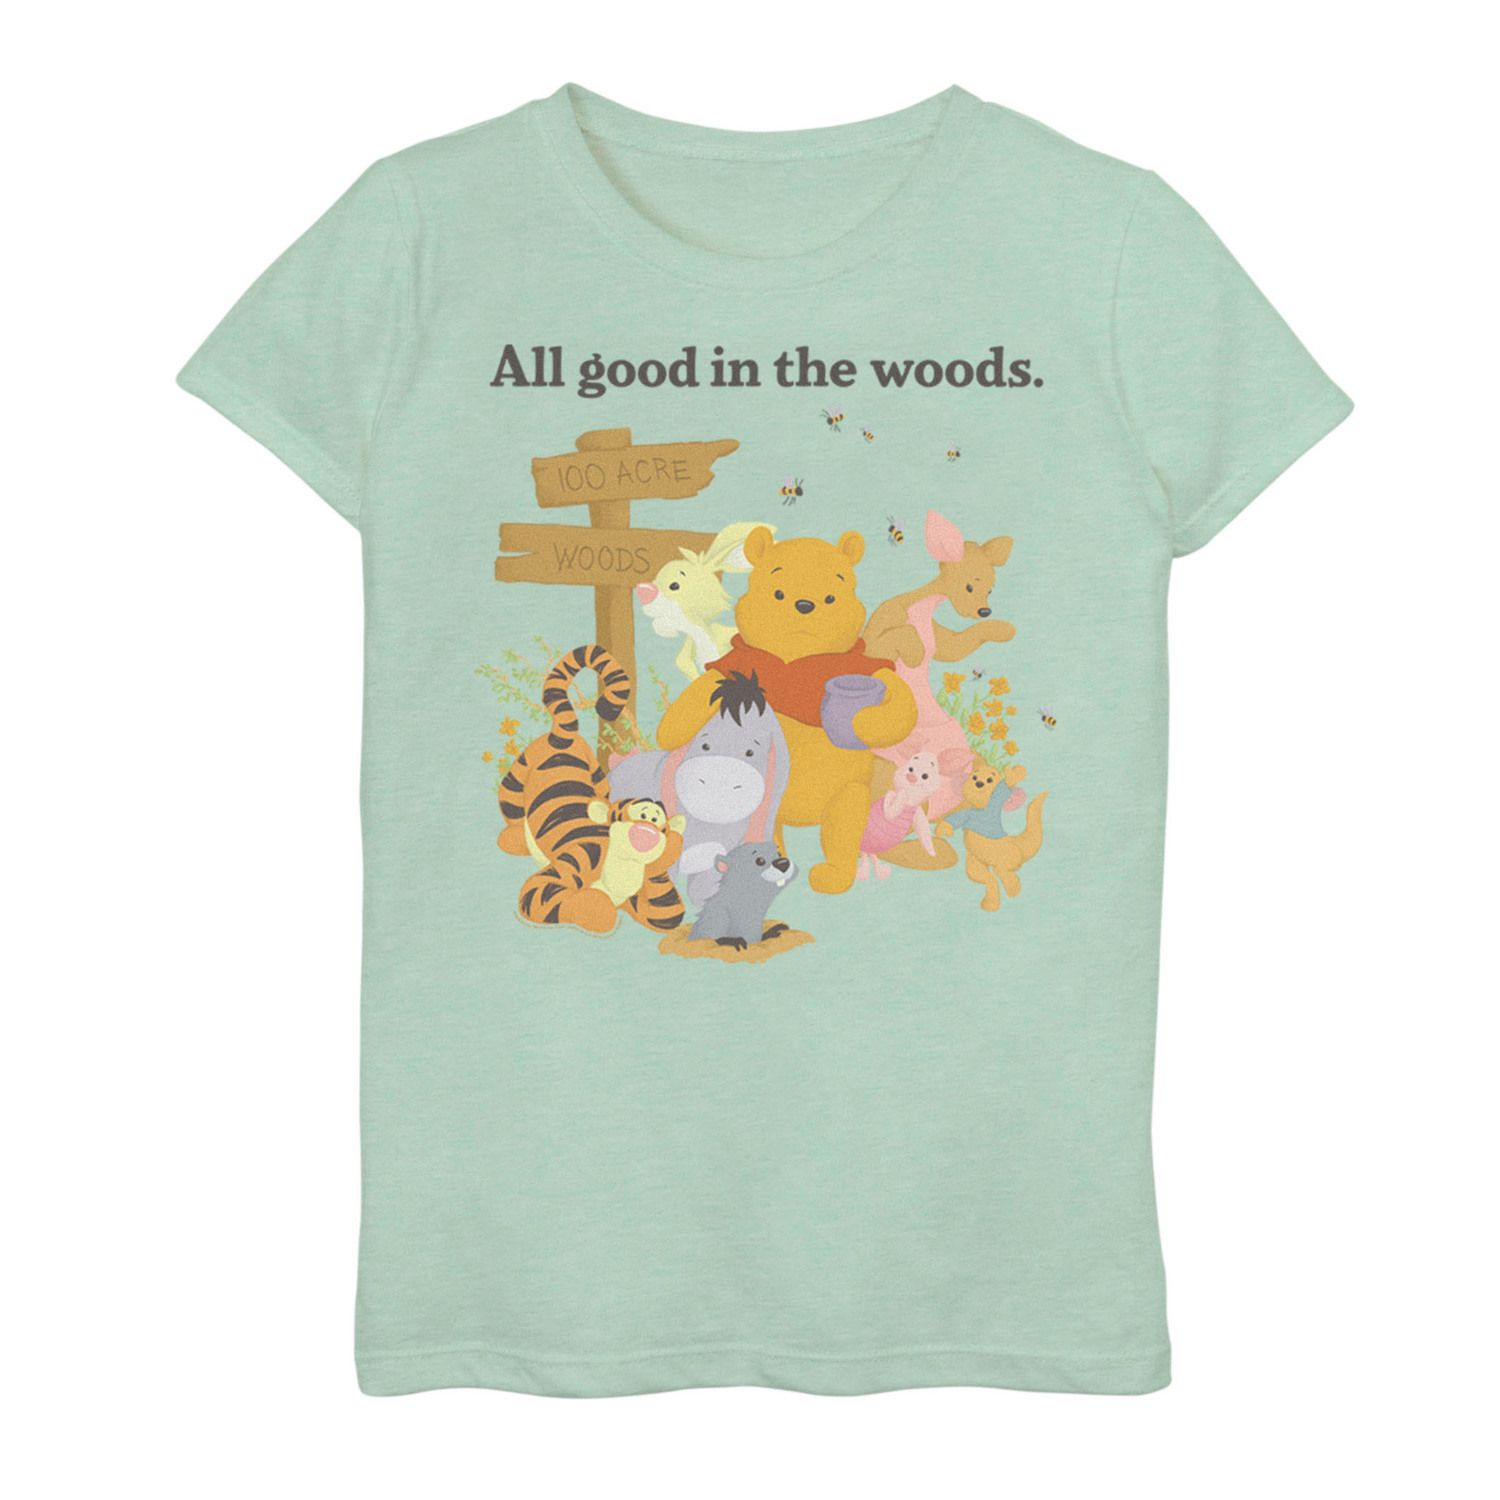 Image for Disney 's Winnie The Pooh Girls 7-16 Group Shot All Good In The Woods Graphic Tee at Kohl's.